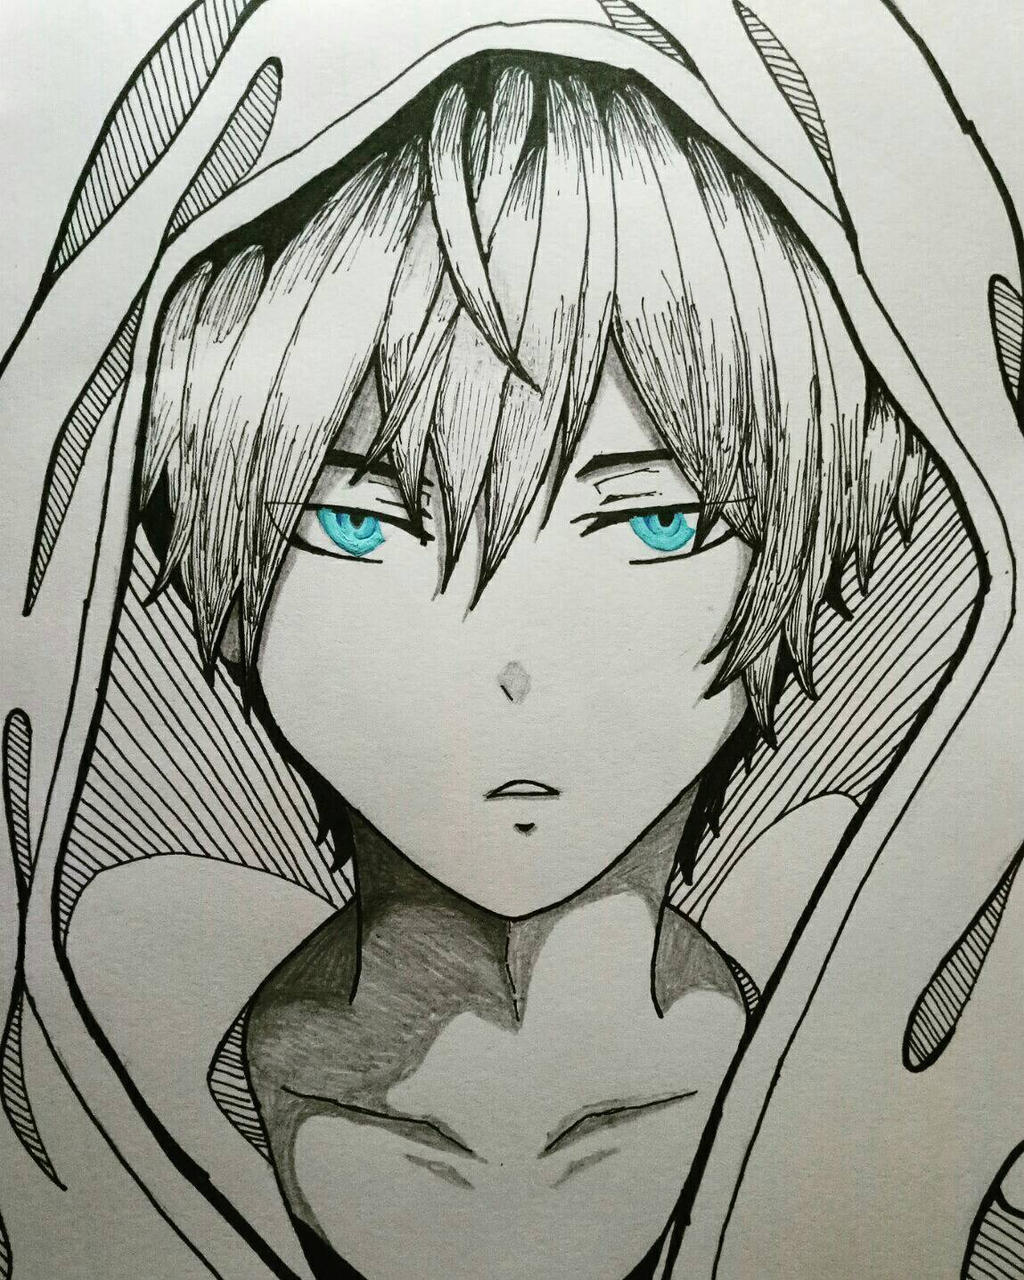 Anime boy with Blue Eyes by XShion74 on DeviantArt